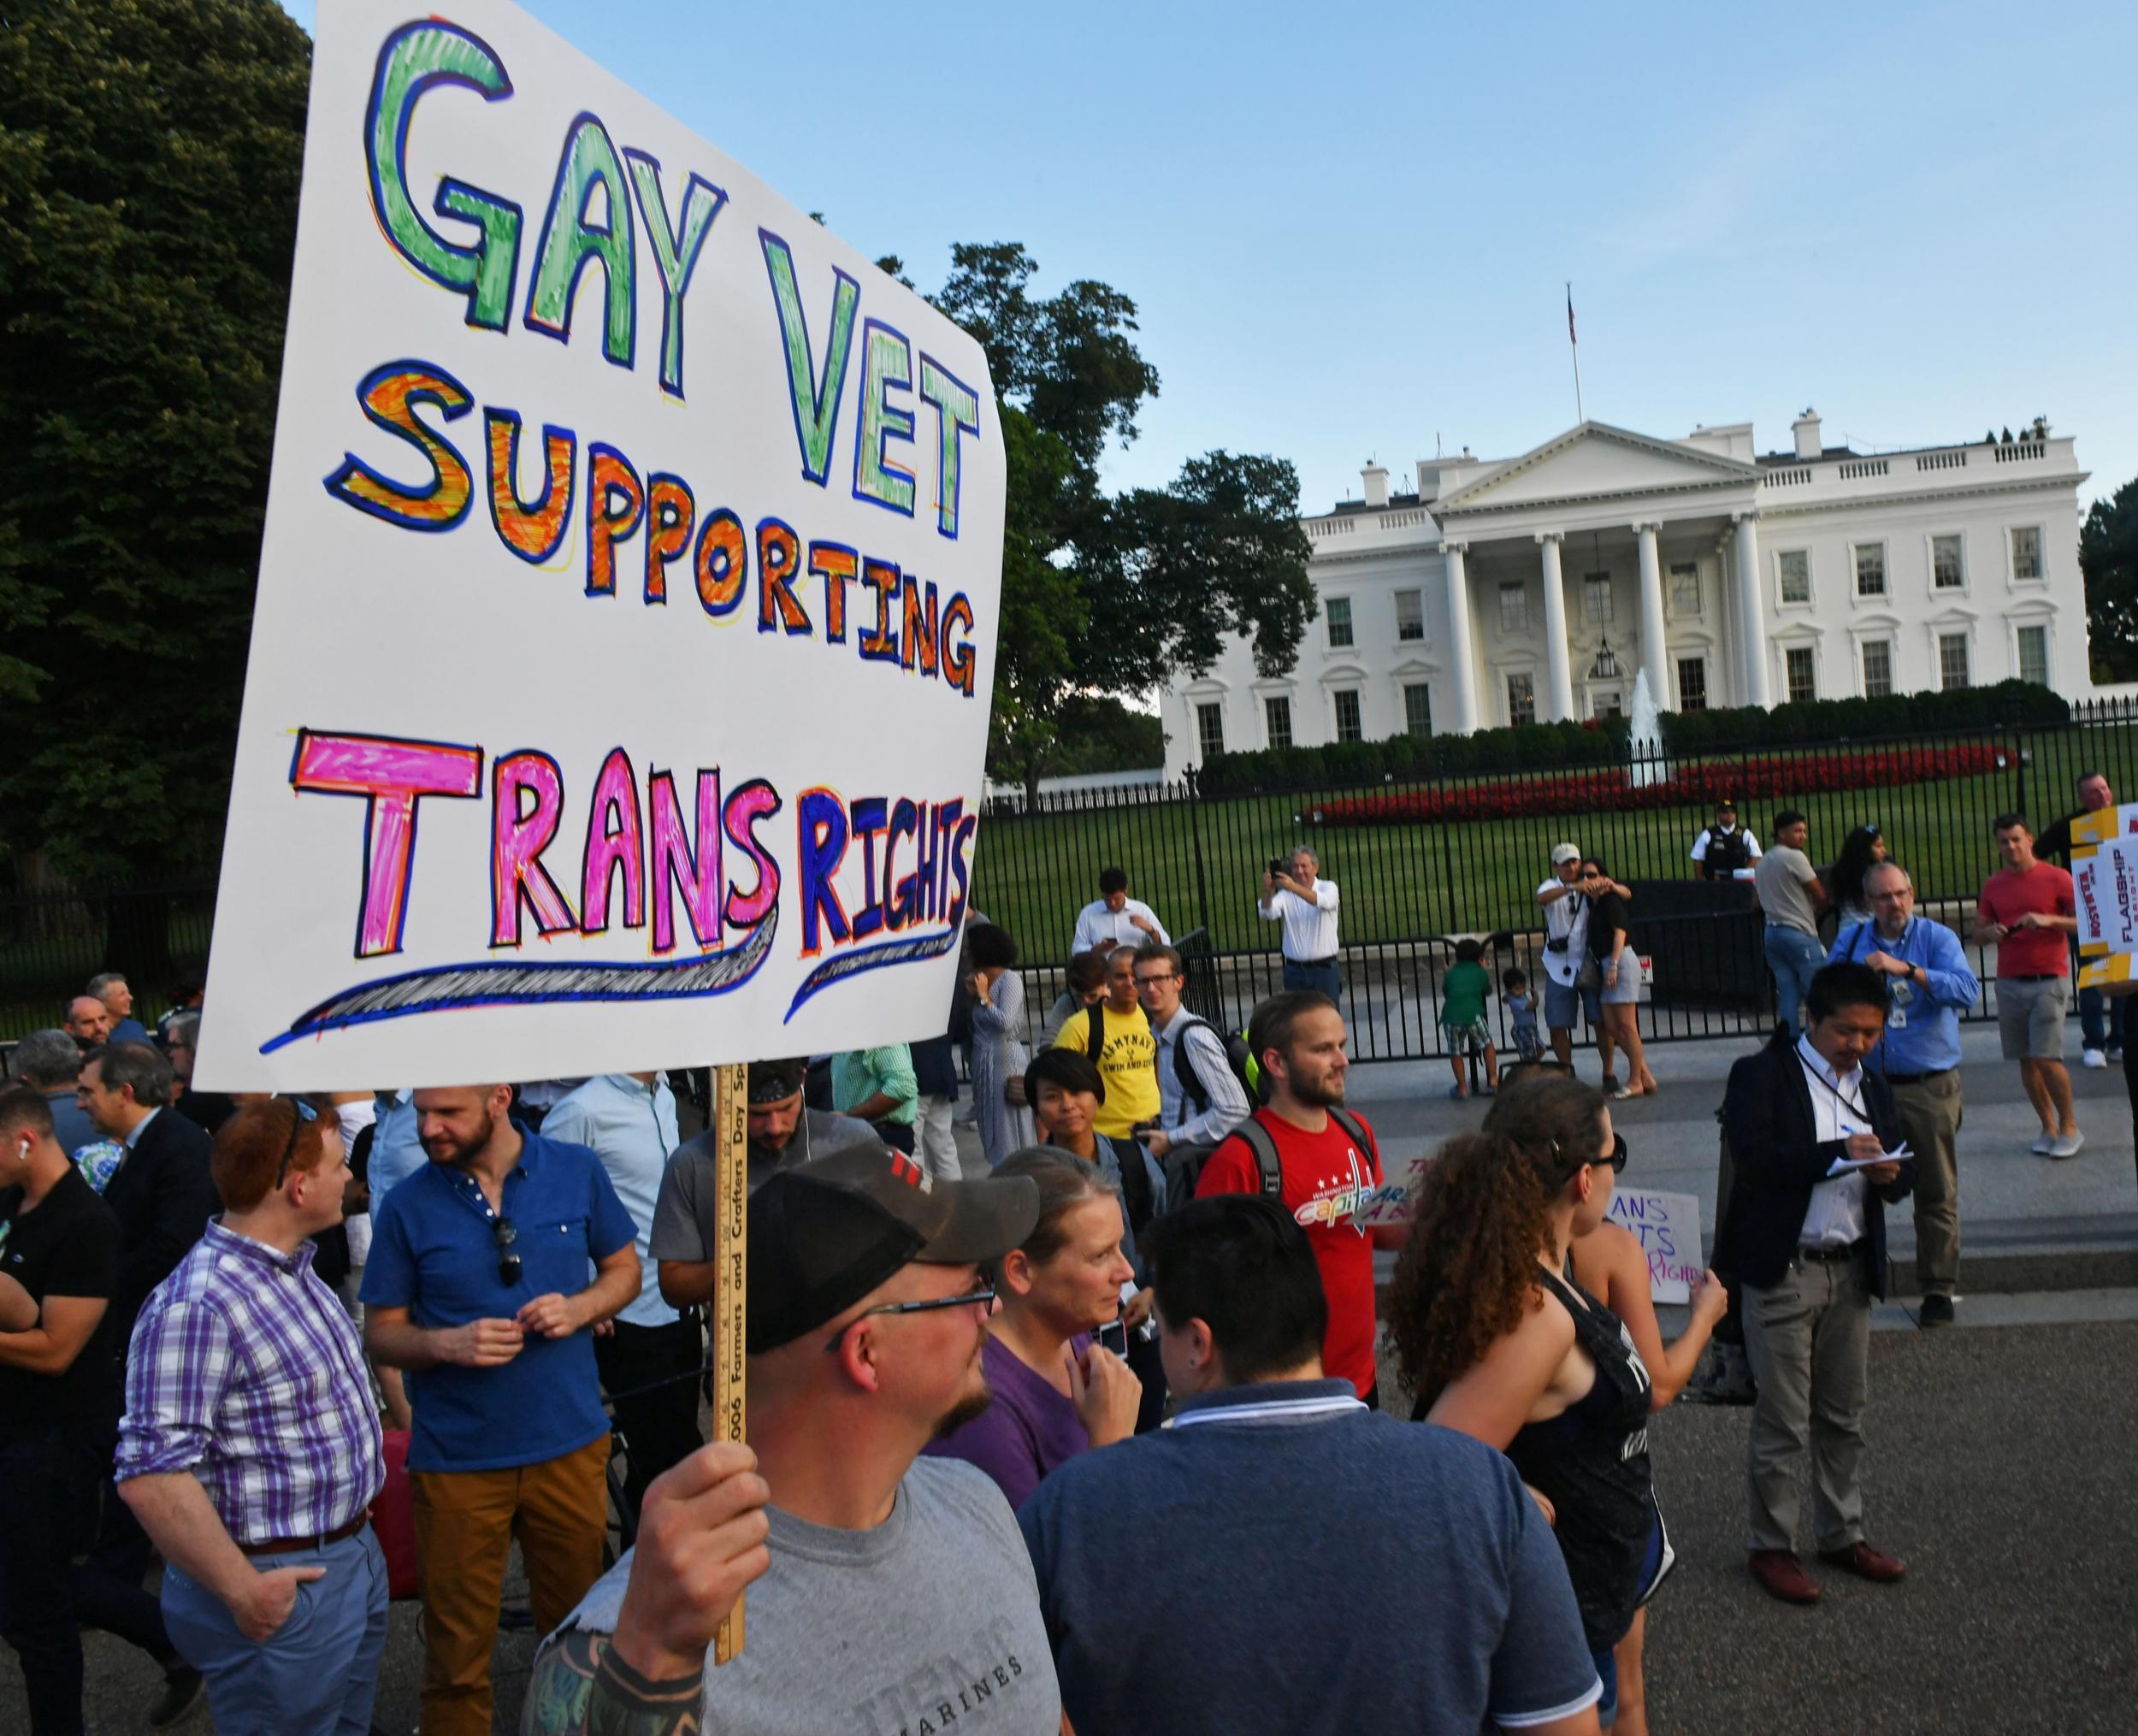 The Trump administration has filed a request to delay allowing transgender US military recruits